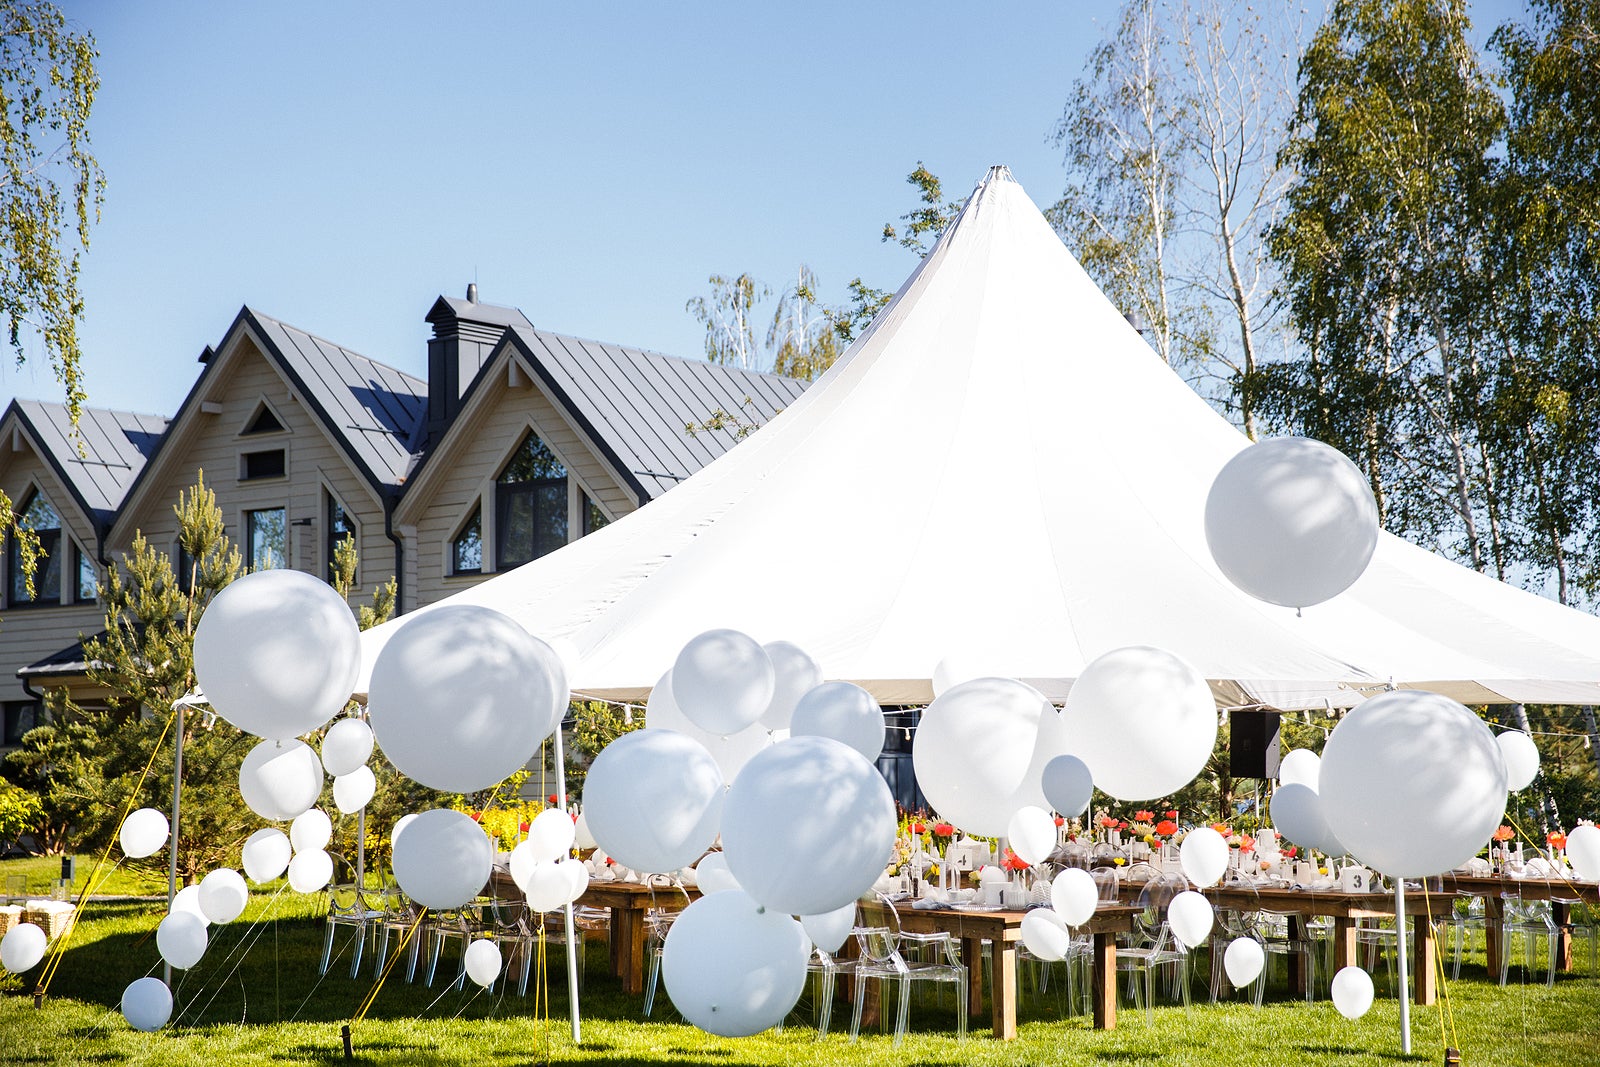 Wedding tent with large balls. Tables sets for wedding or another catered event dinner.